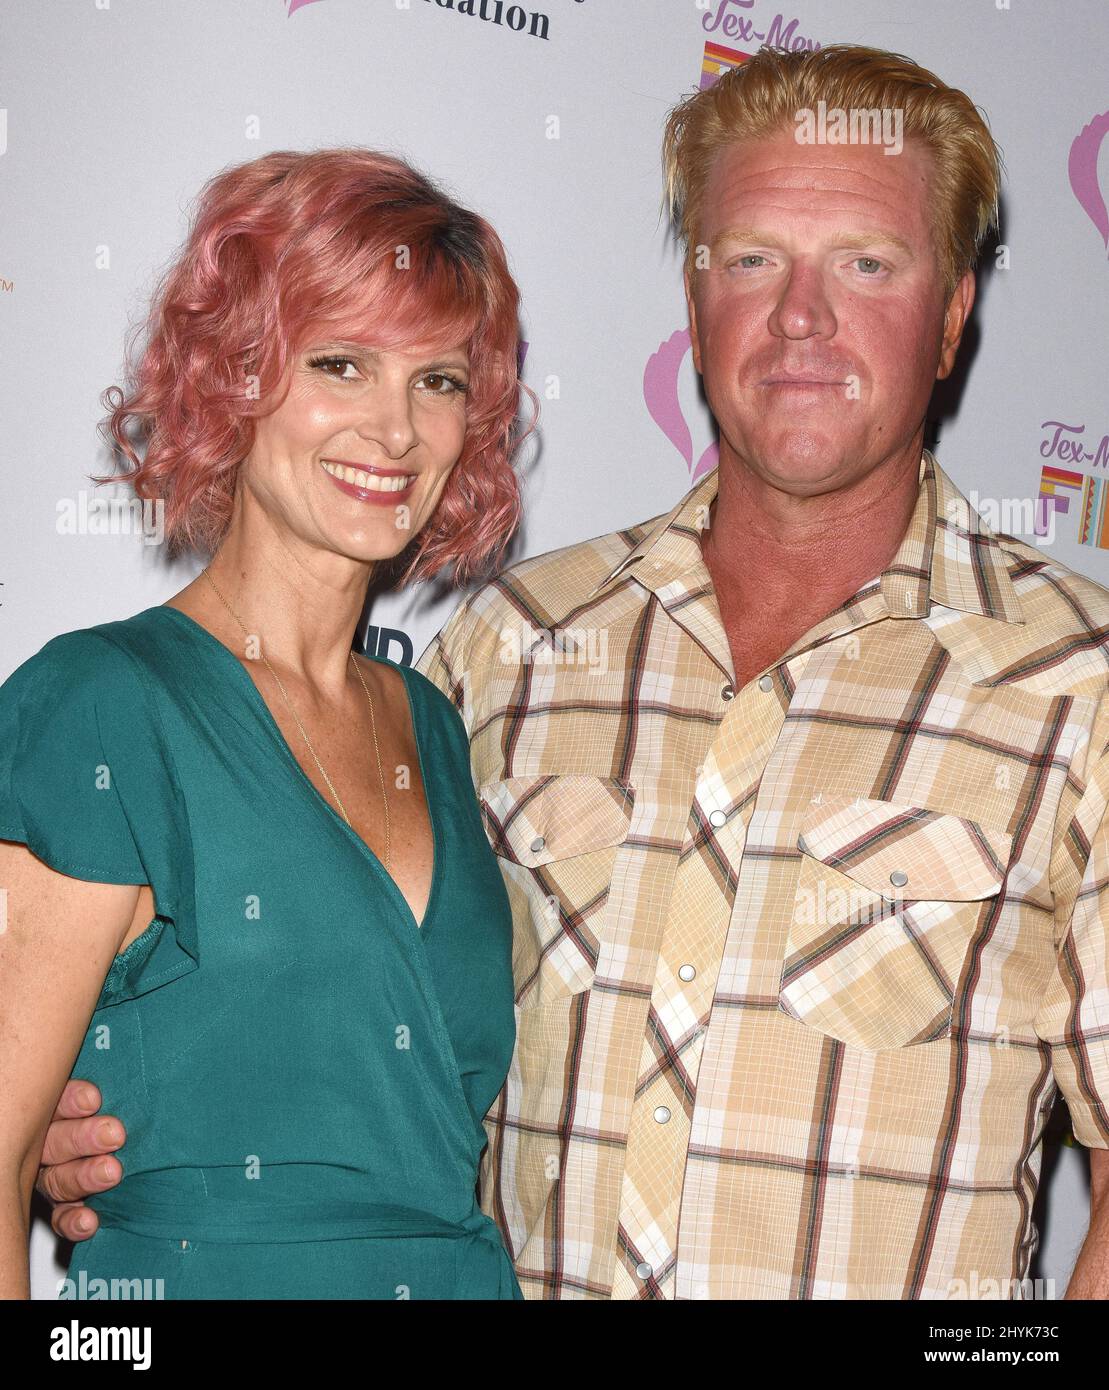 Jake Busey and April Hutchinson at The Farrah Fawcett Foundation's Tex-Mex Fiesta held at the Wallis Annenberg Center for the Performing Arts on September 6, 2019 in Beverly Hills, USA. Stock Photo